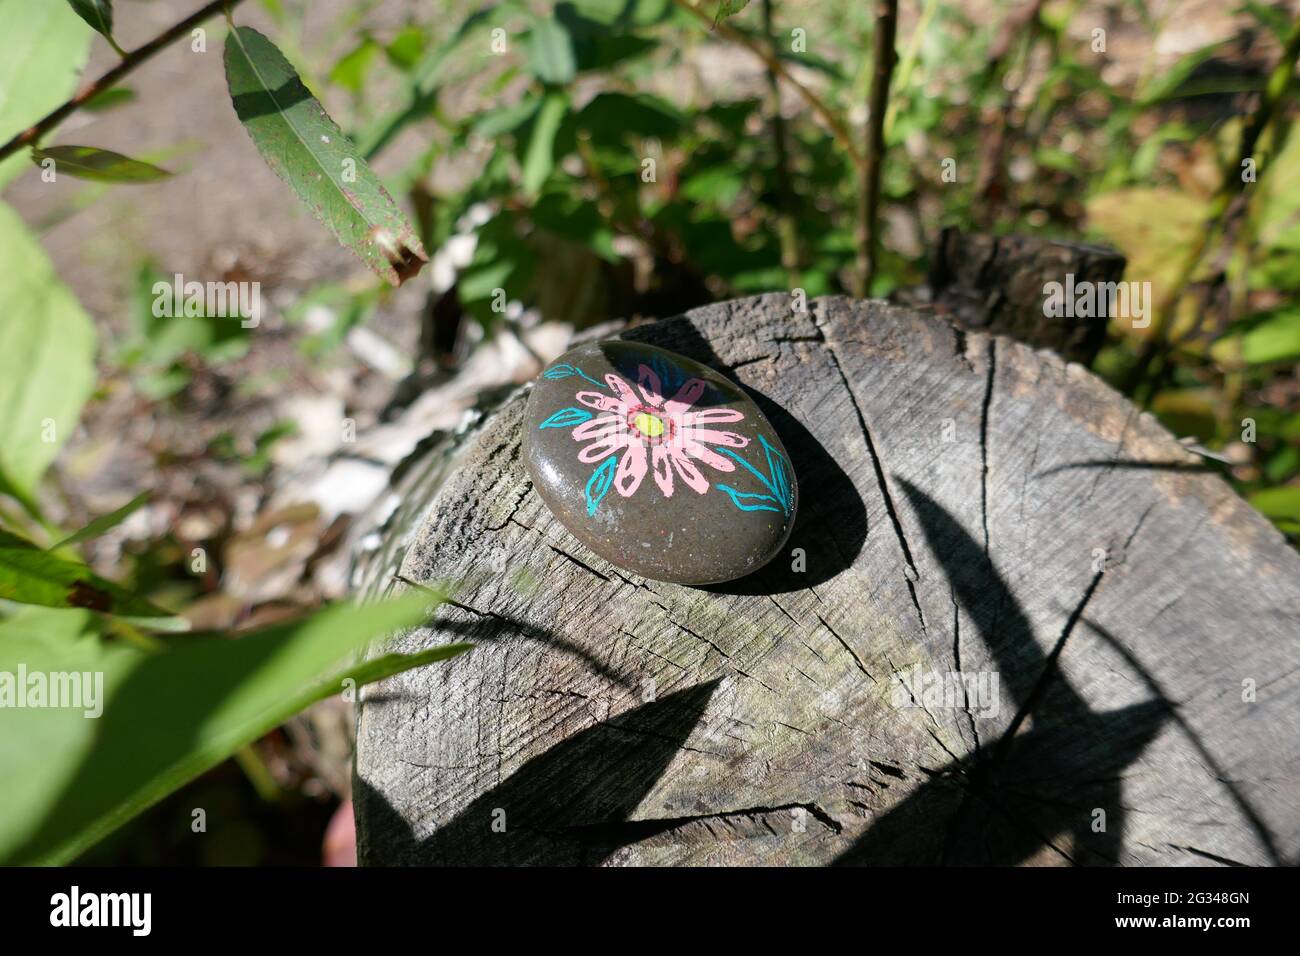 Kindness rock with hand painted flower Stock Photo